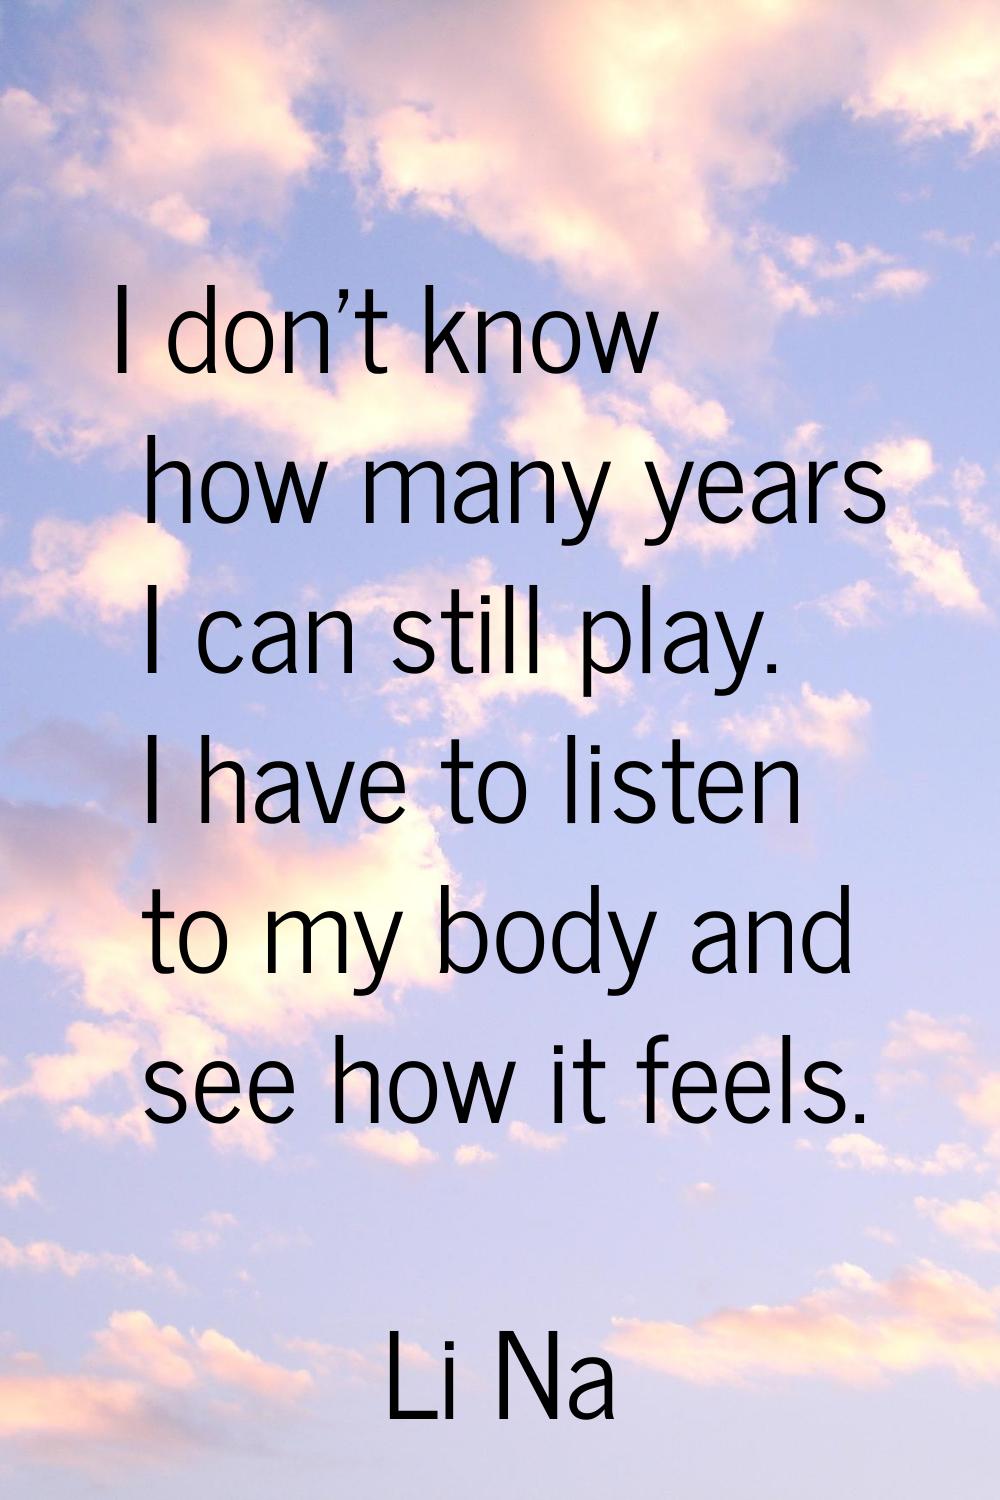 I don't know how many years I can still play. I have to listen to my body and see how it feels.